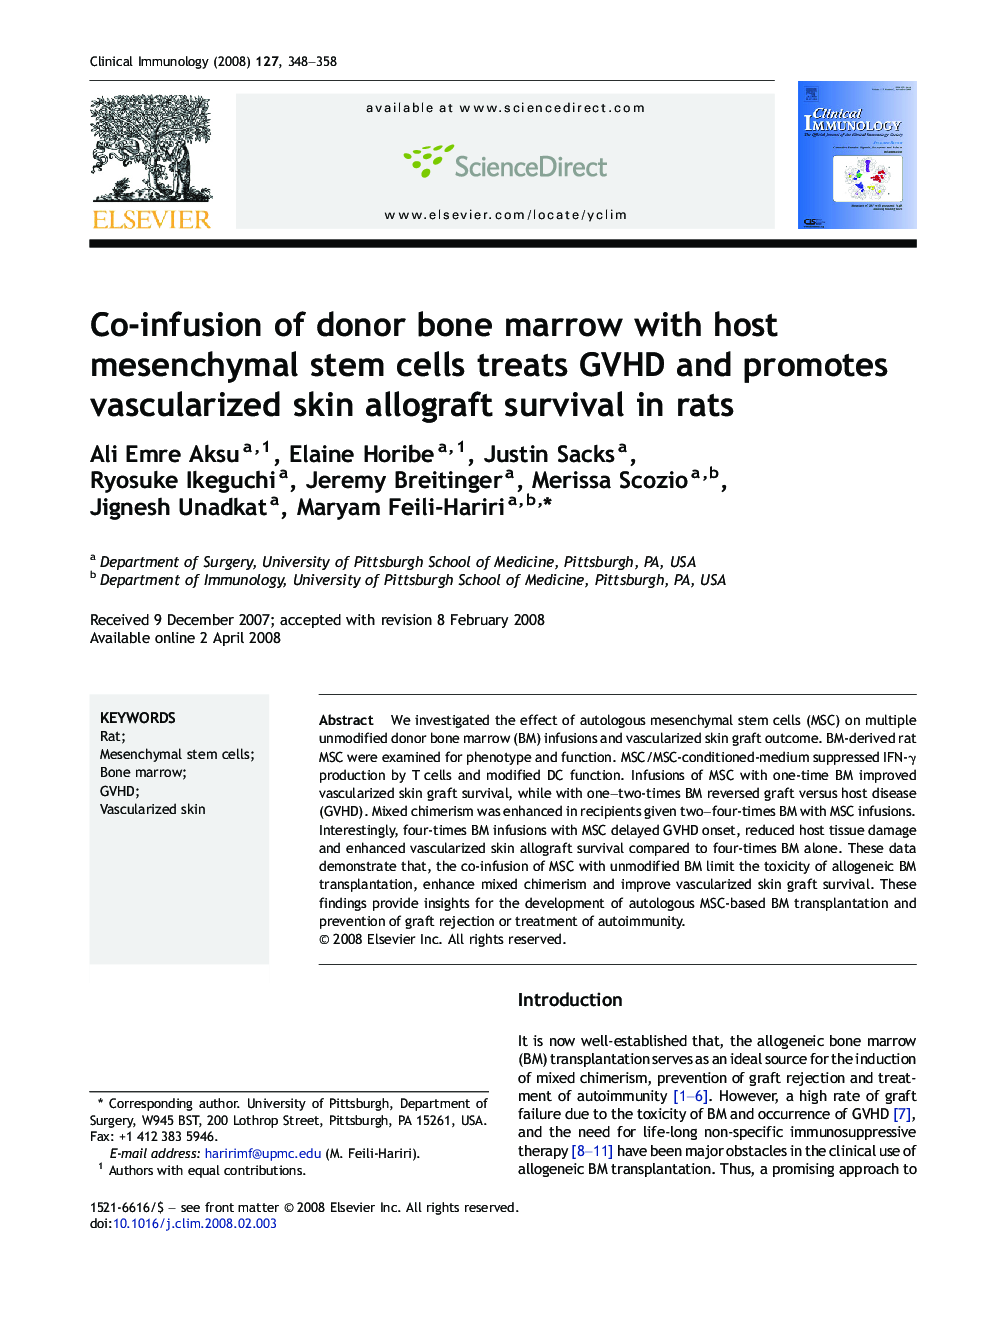 Co-infusion of donor bone marrow with host mesenchymal stem cells treats GVHD and promotes vascularized skin allograft survival in rats